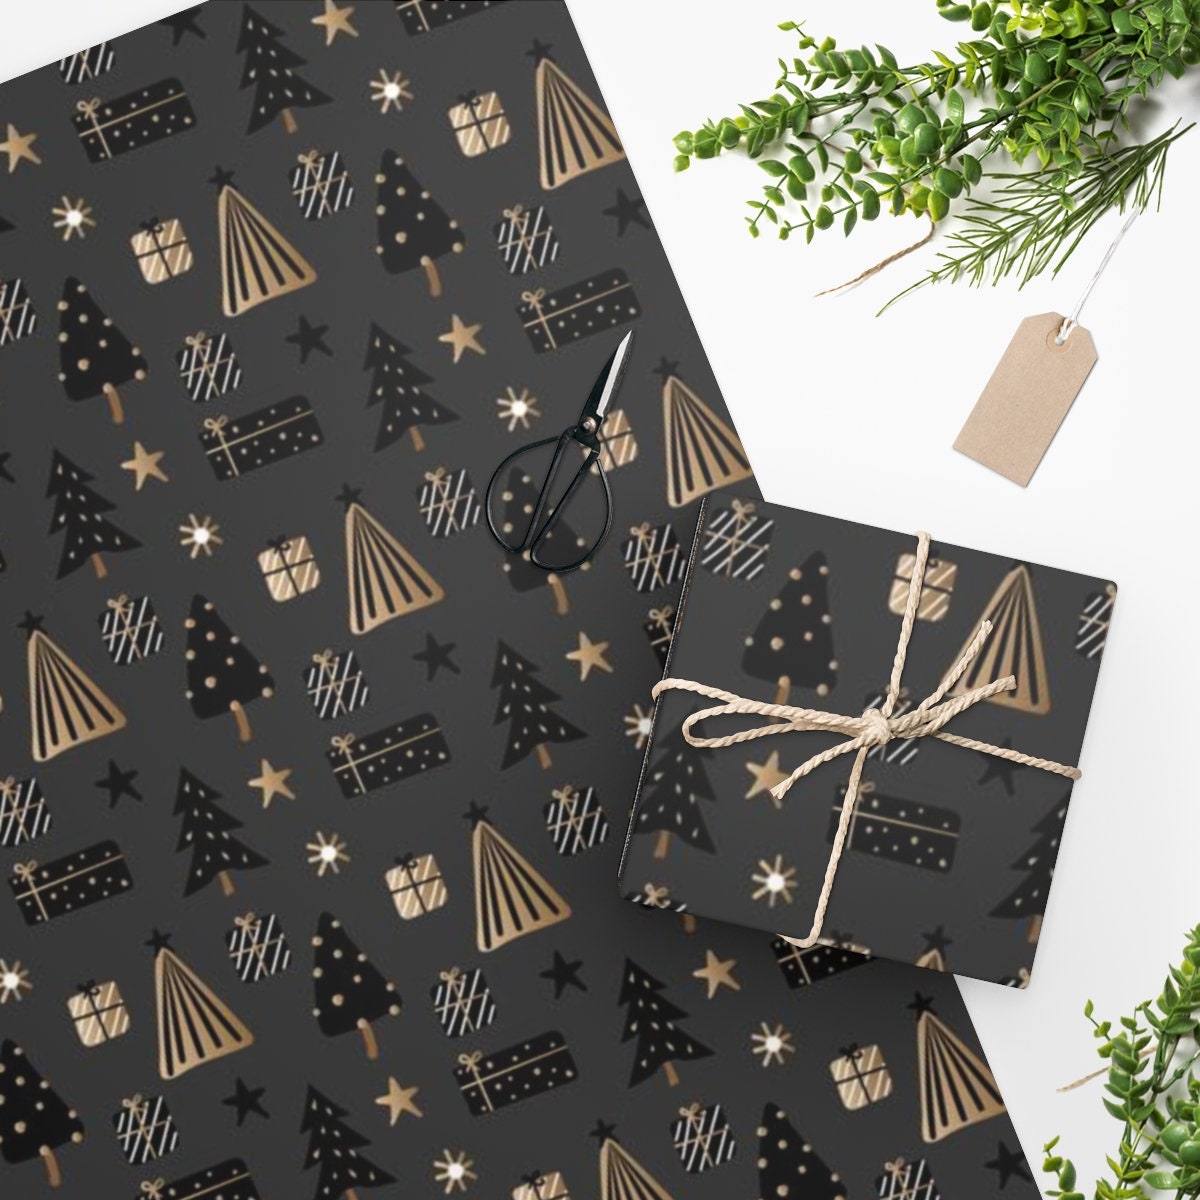 Matte Black Gift Wrap 15 Feet Chalkboard Paper Roll Black -  UK  Black  wrapping paper, Elegant gift wrapping, Christmas gift wrapping